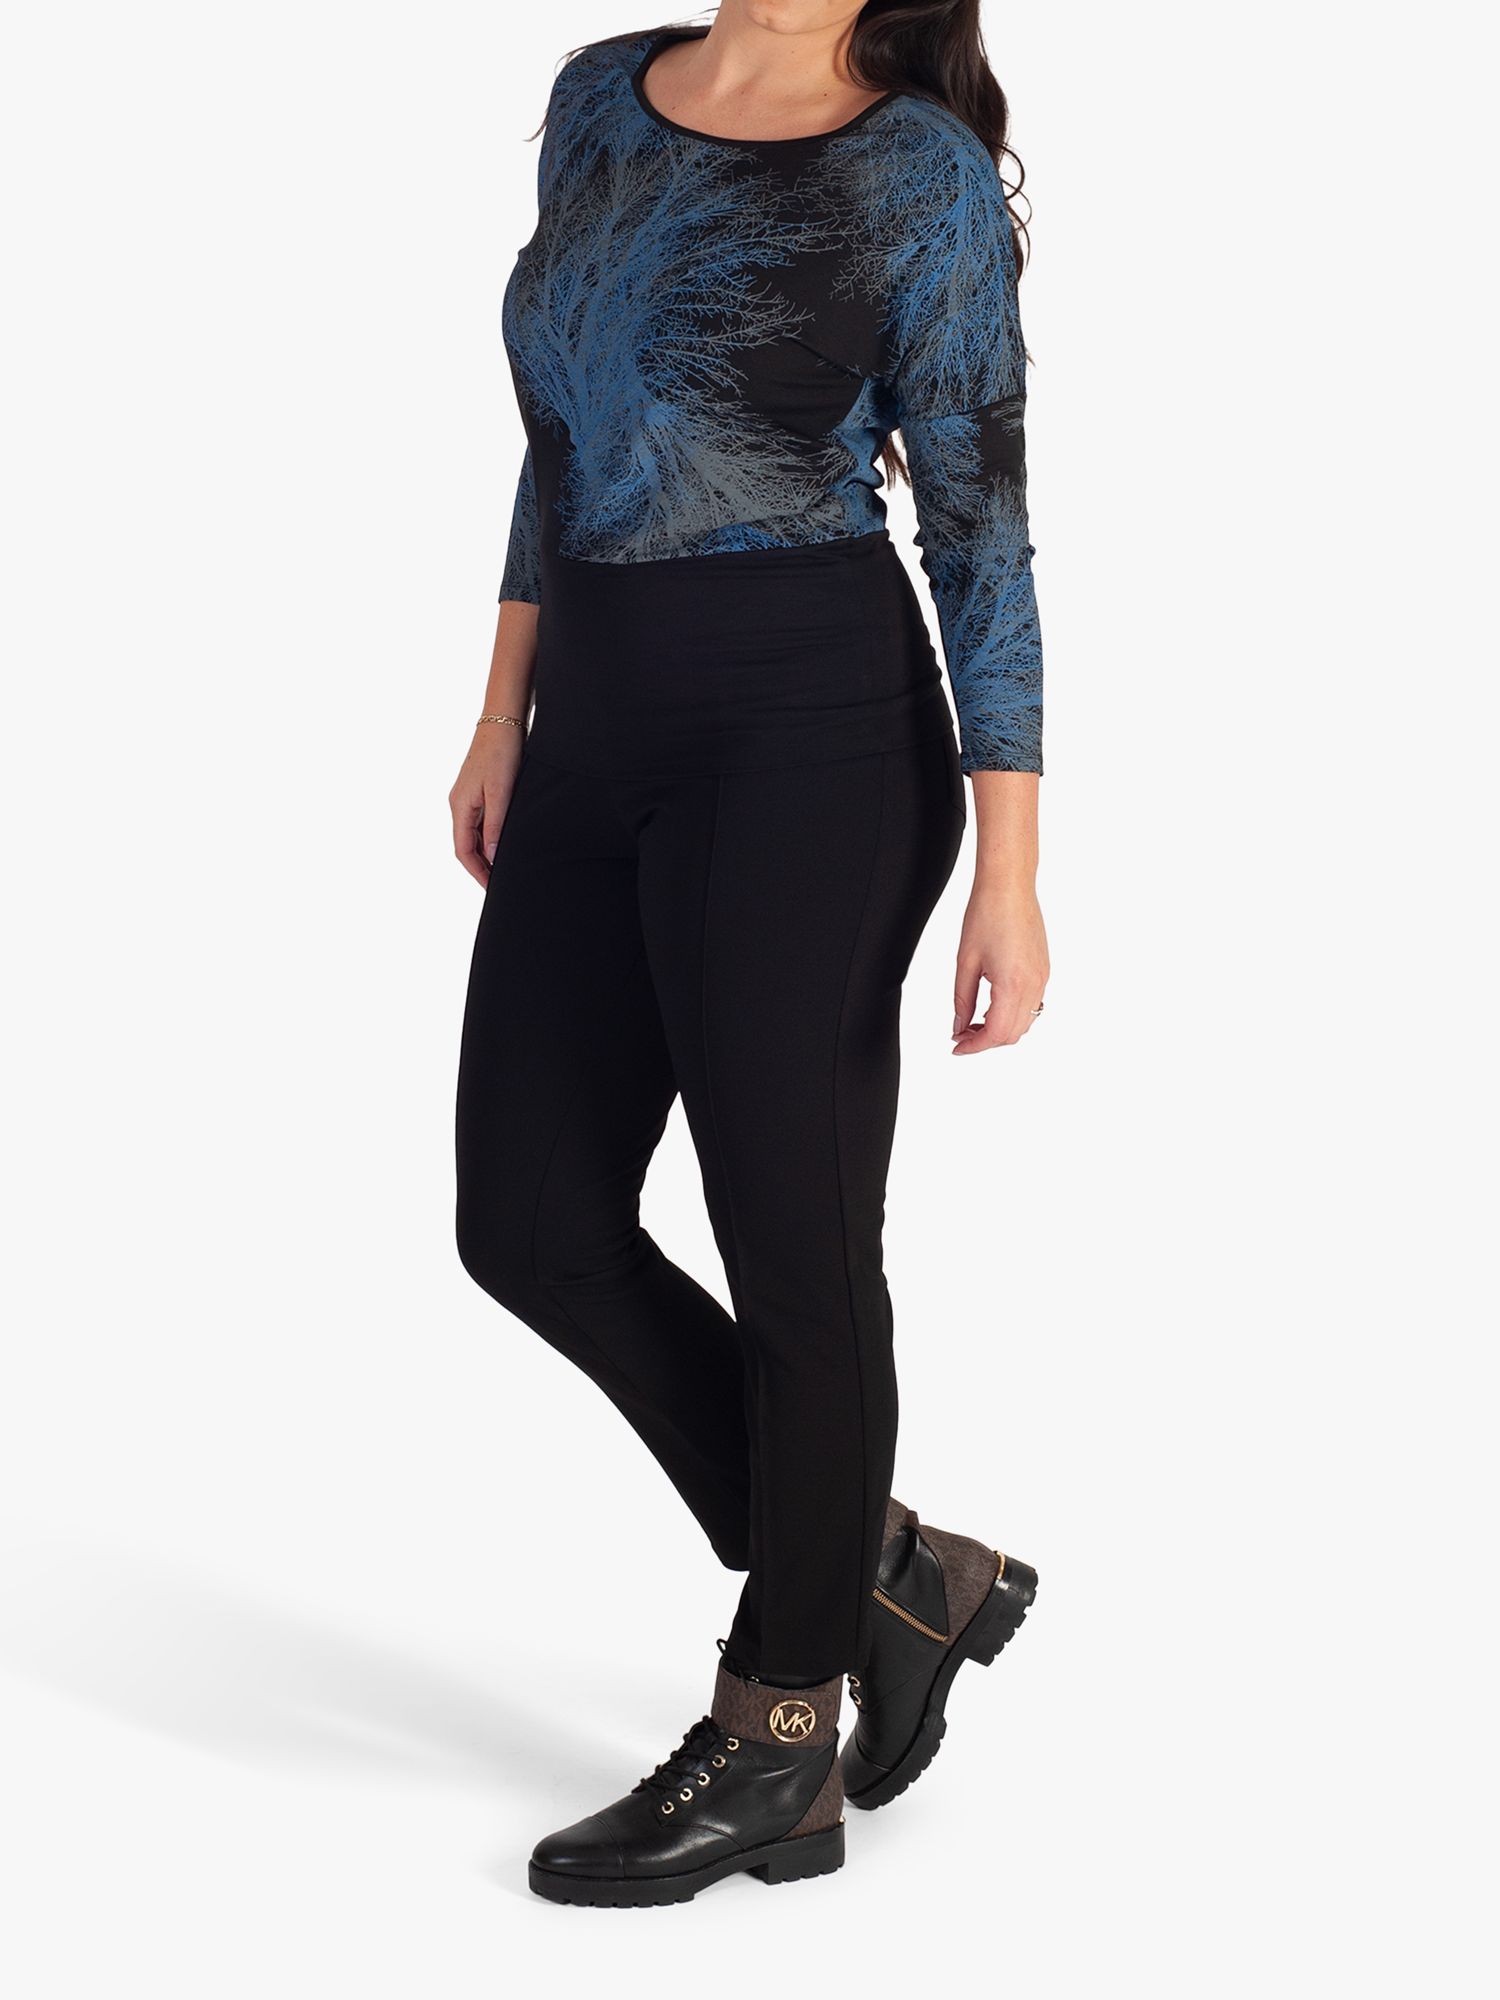 chesca Tree Print Long Sleeved Top, Black/Blue, 14-16